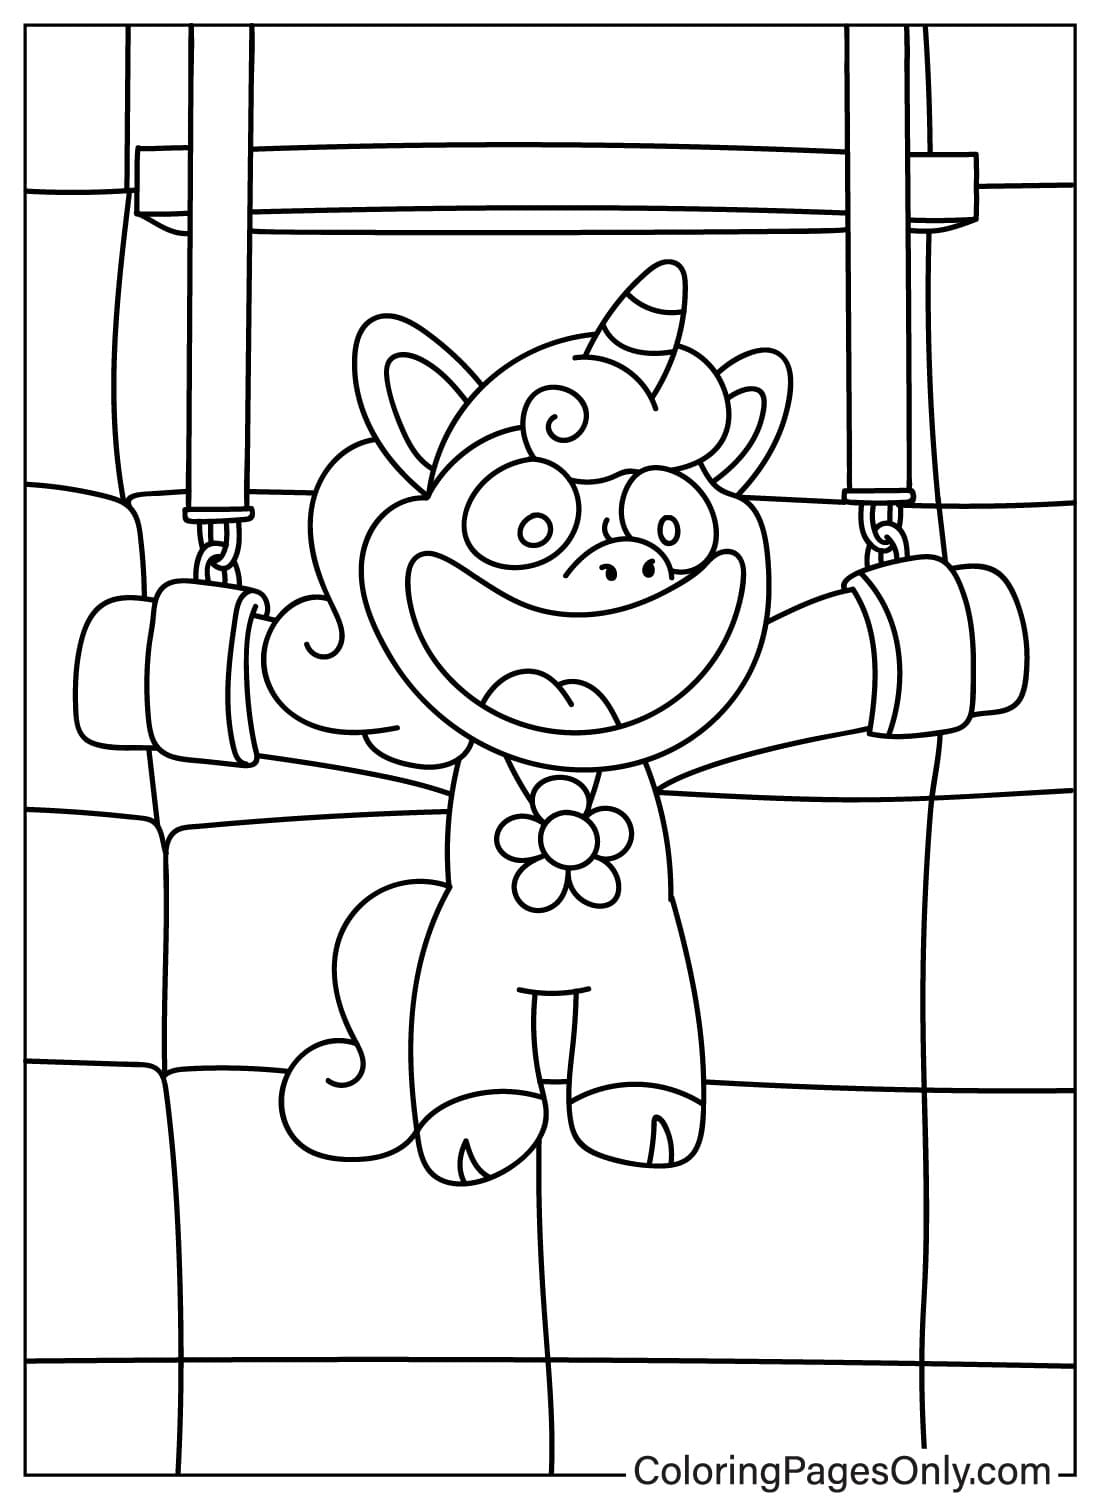 CraftyCorn Coloring Page Hanging on the Wall from CraftyCorn